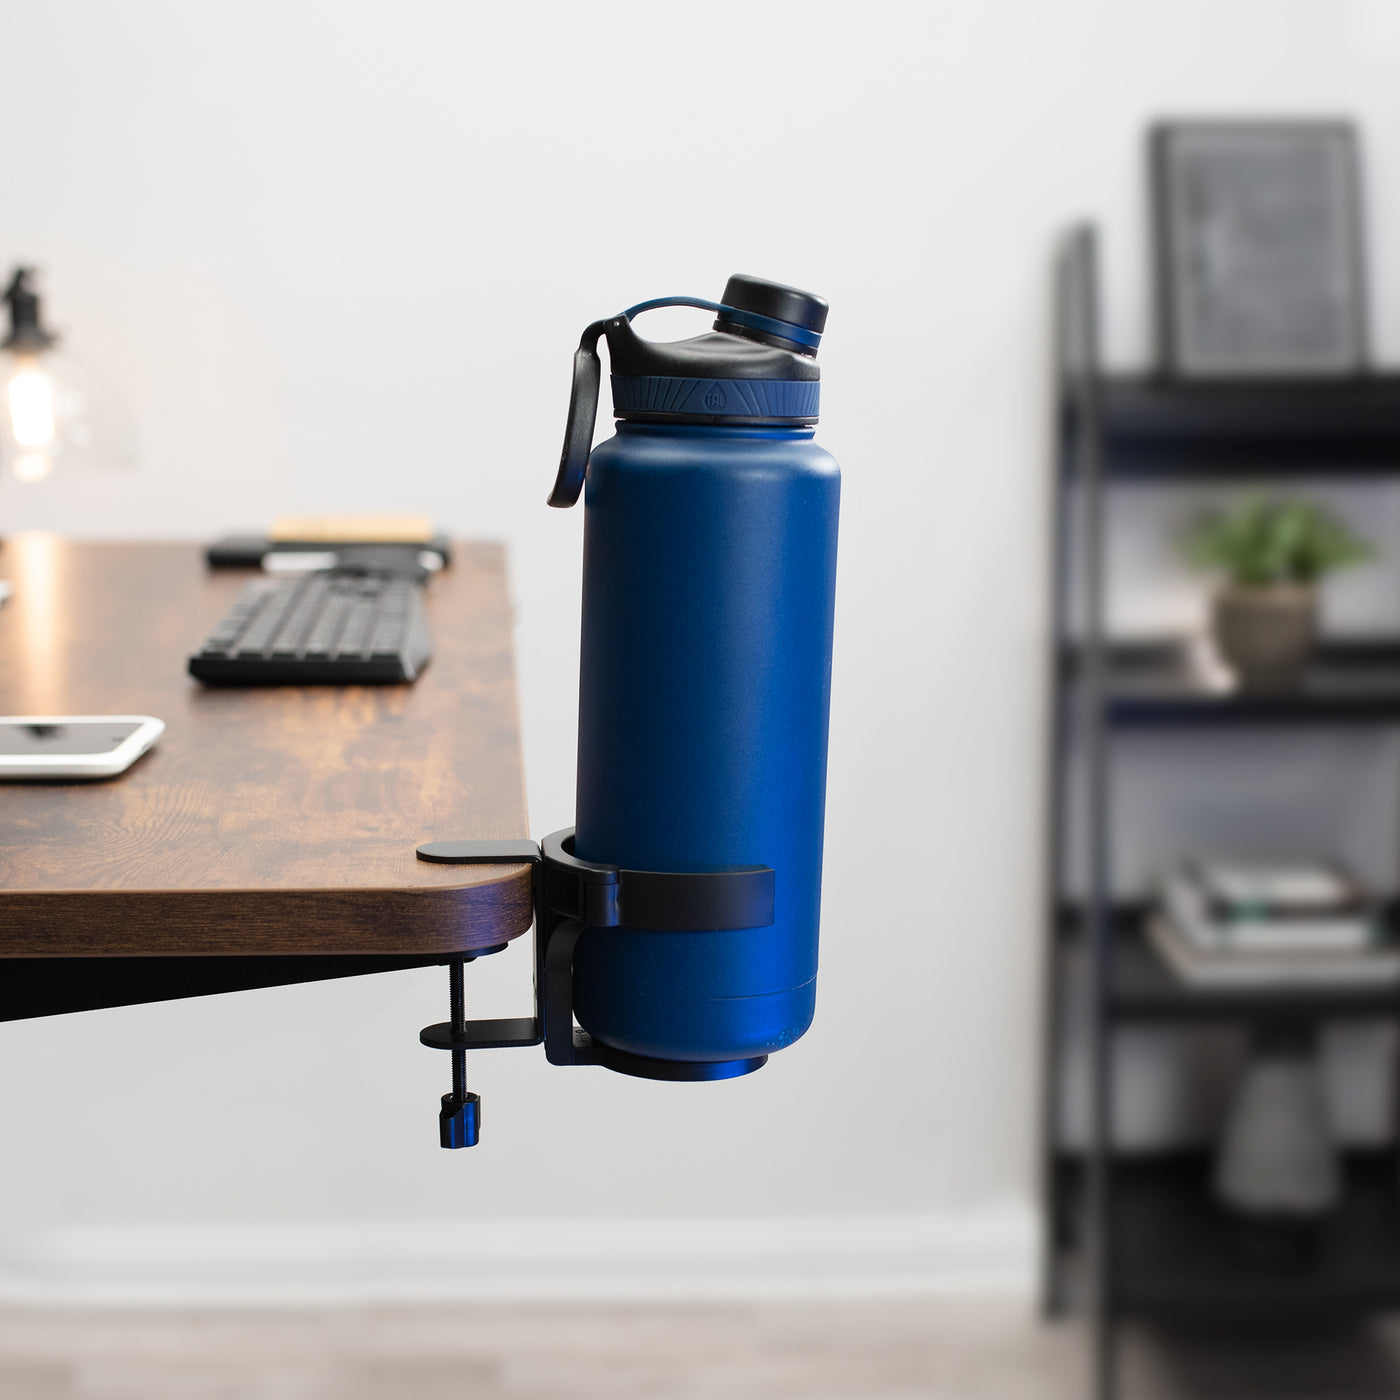 Water bottle desk mount for a designated spot off of the self for your water bottle.